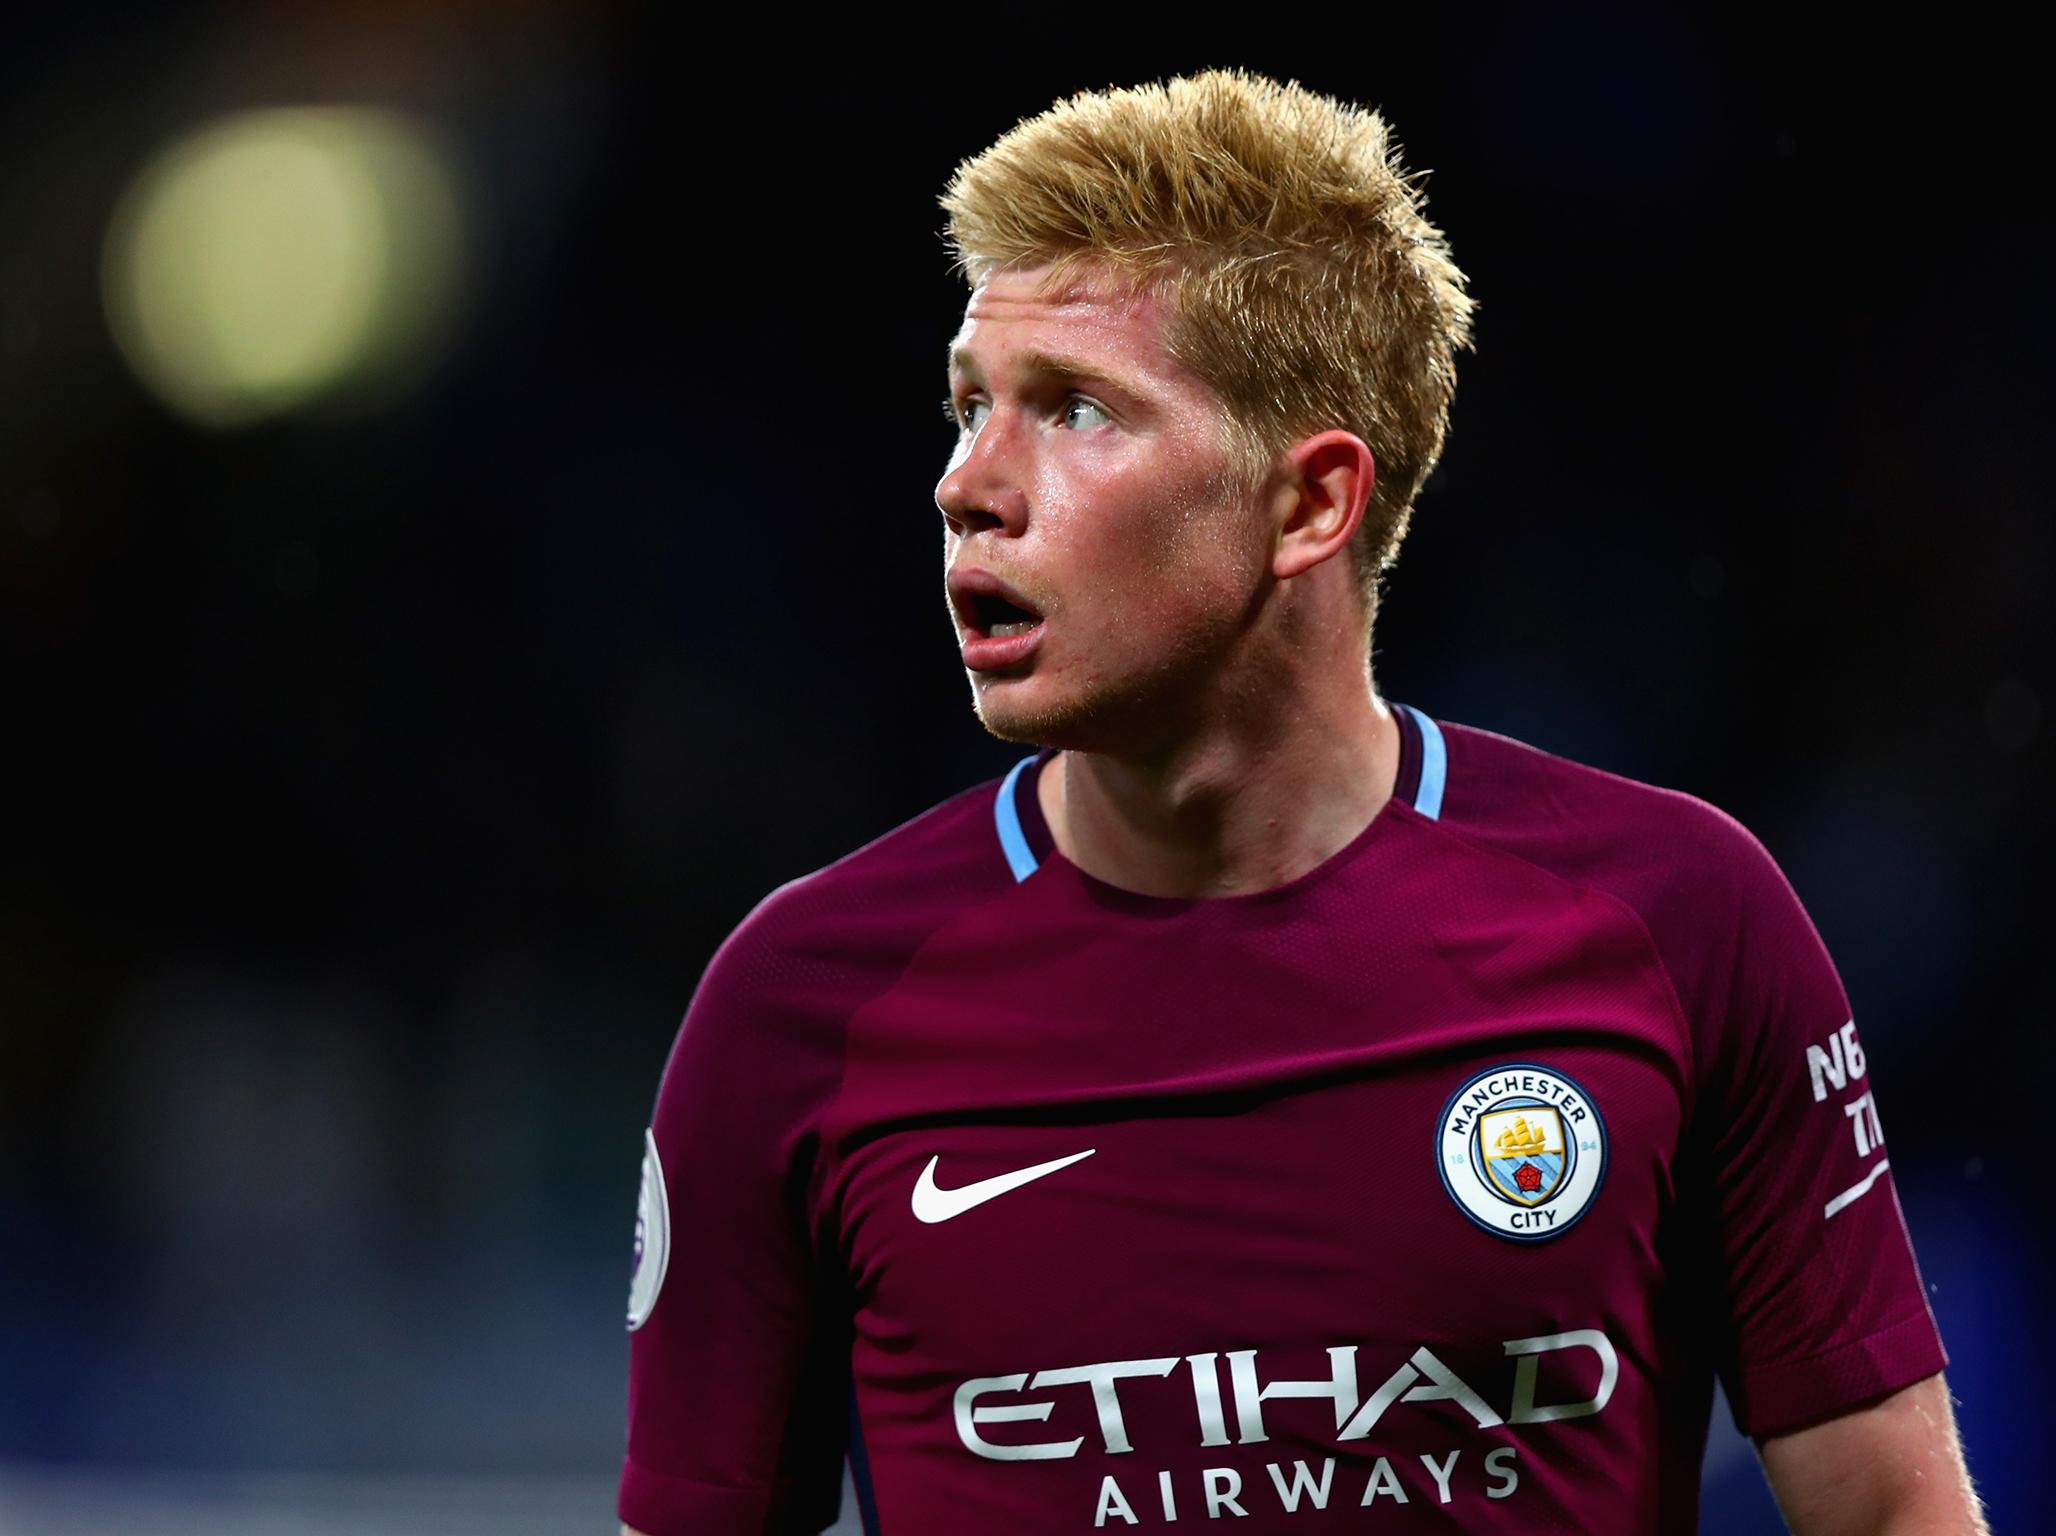 Kevin de Bruyne doesn't think Manchester City can go undefeated despite their fine start